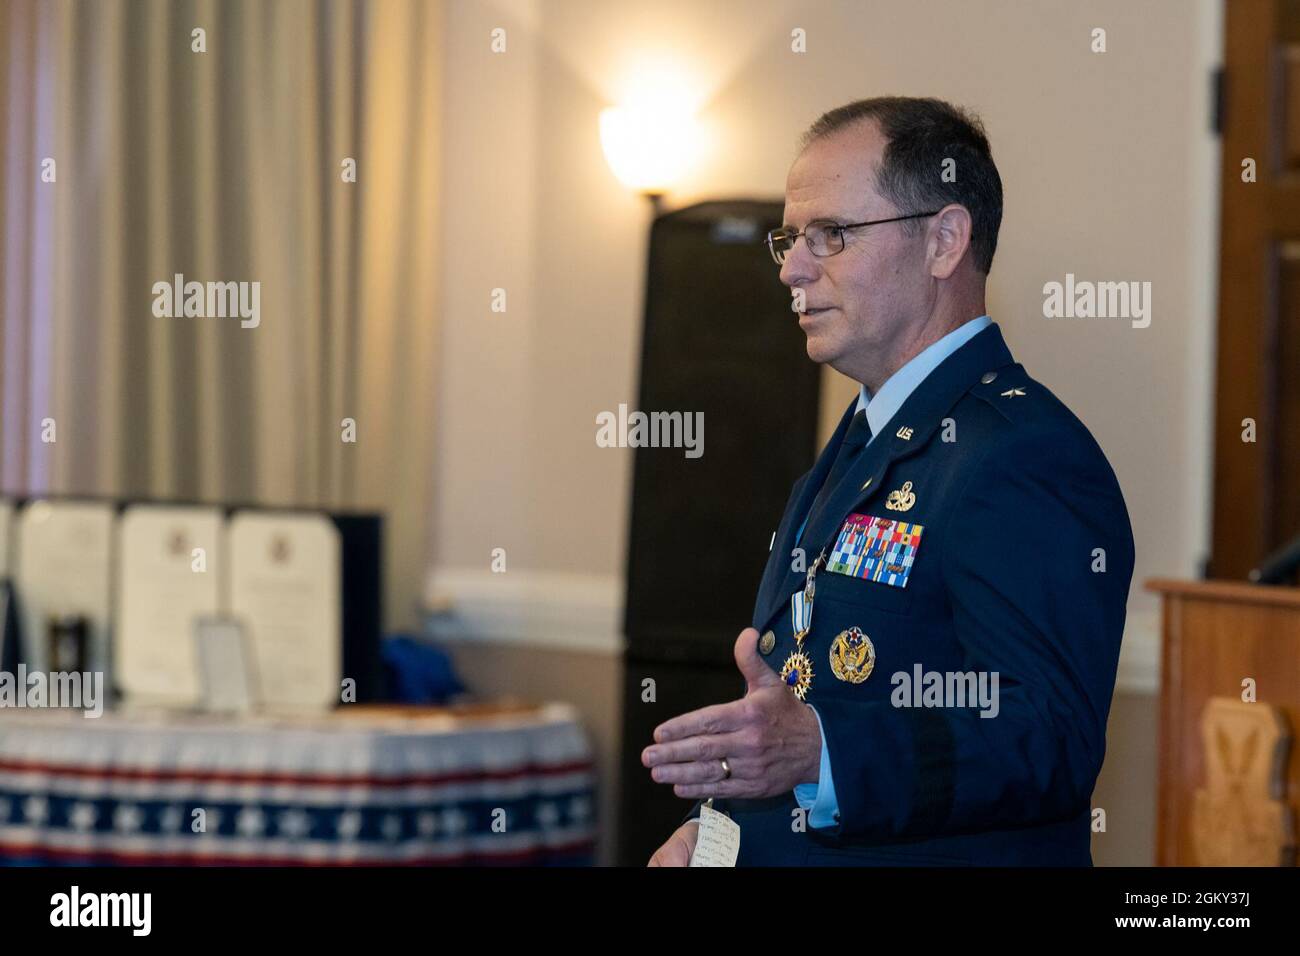 Brig. Gen. Eric Froehlich, Air Force Global Strike Command director of logistics and engineering, makes remarks during his retirement ceremony at Barksdale Air Force Base, Louisiana, July 23, 2021. Froehlich served honorably in the Air Force for 29 years. Stock Photo